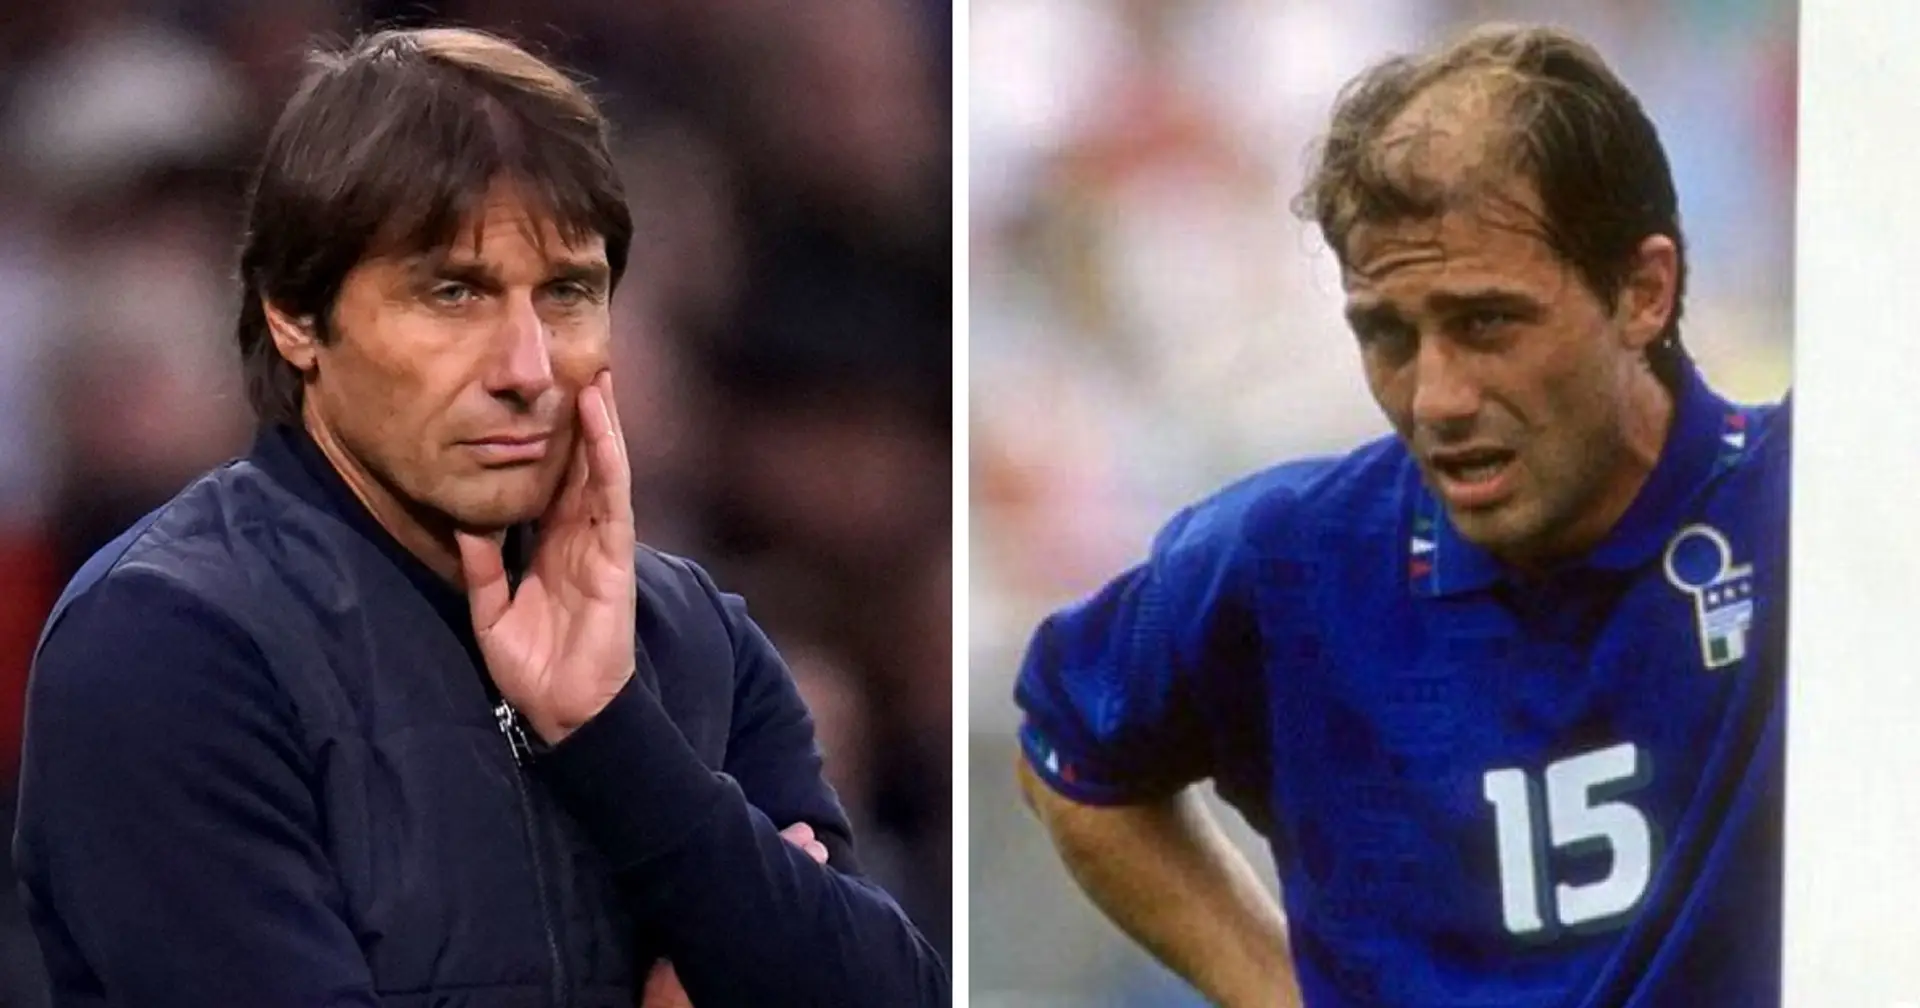 'I already solved it': Antonio Conte on the one thing he didn't like about himself 